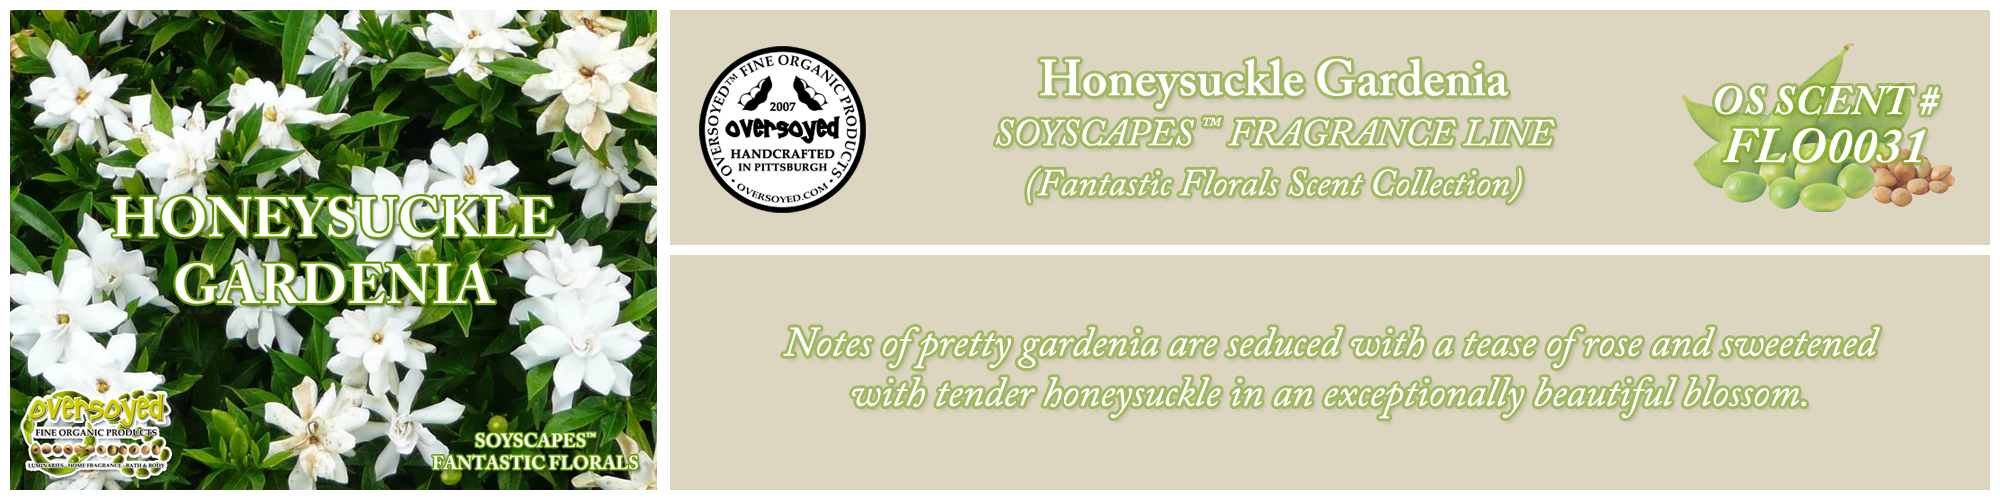 Honeysuckle Gardenia Handcrafted Products Collection